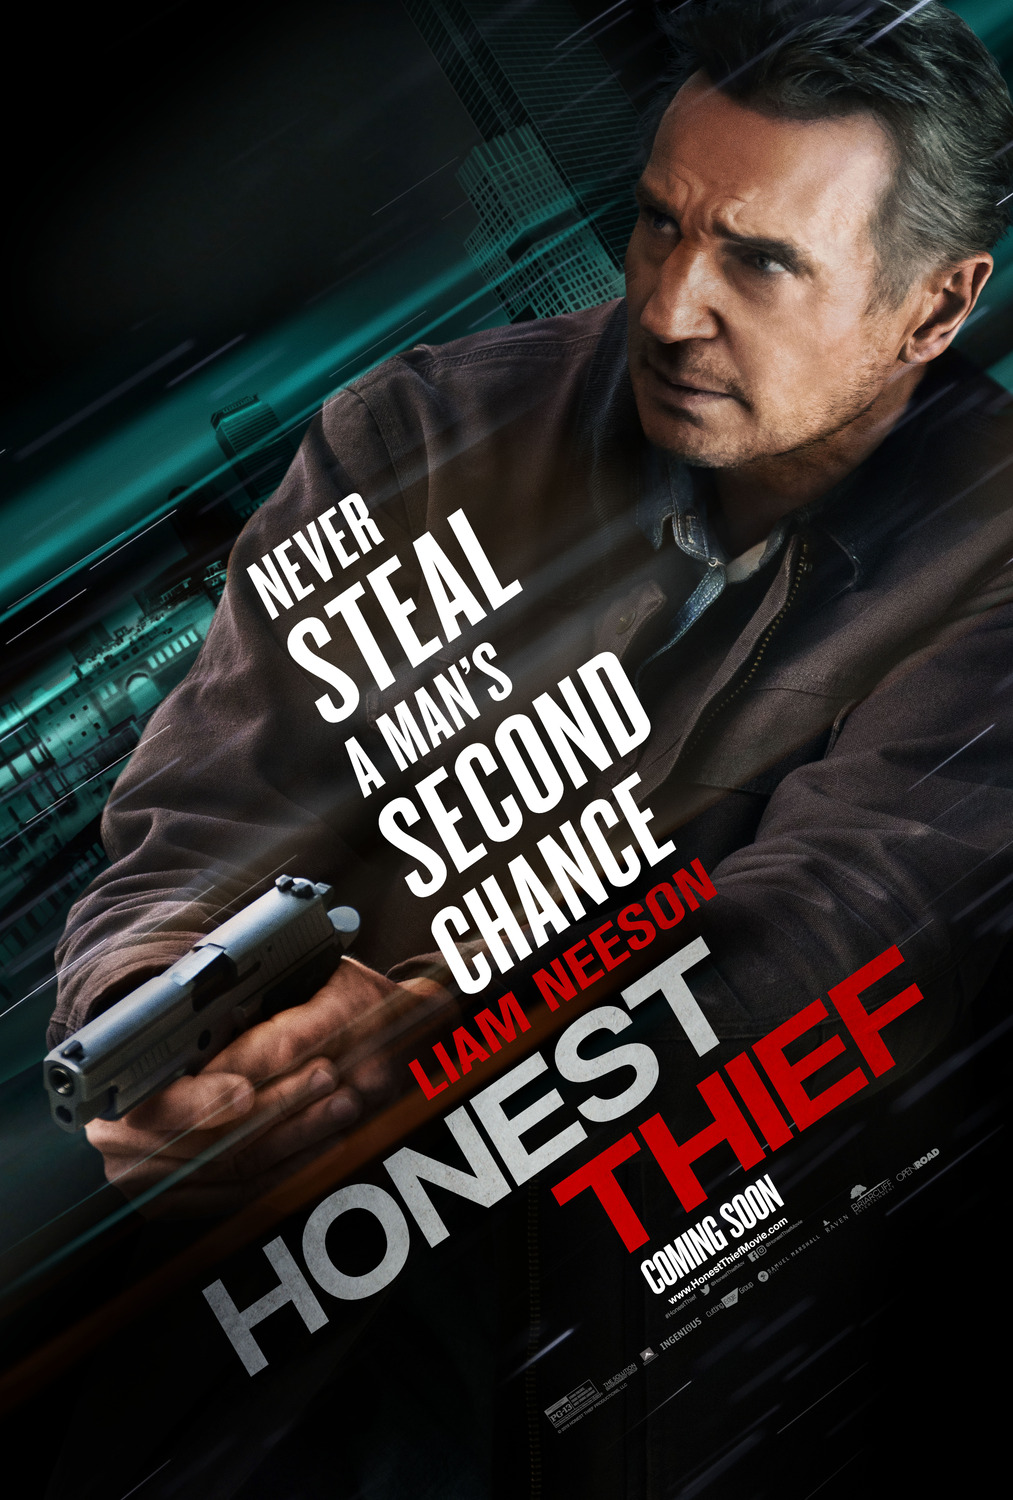 The Honest Thief poster starring Liam Neeson